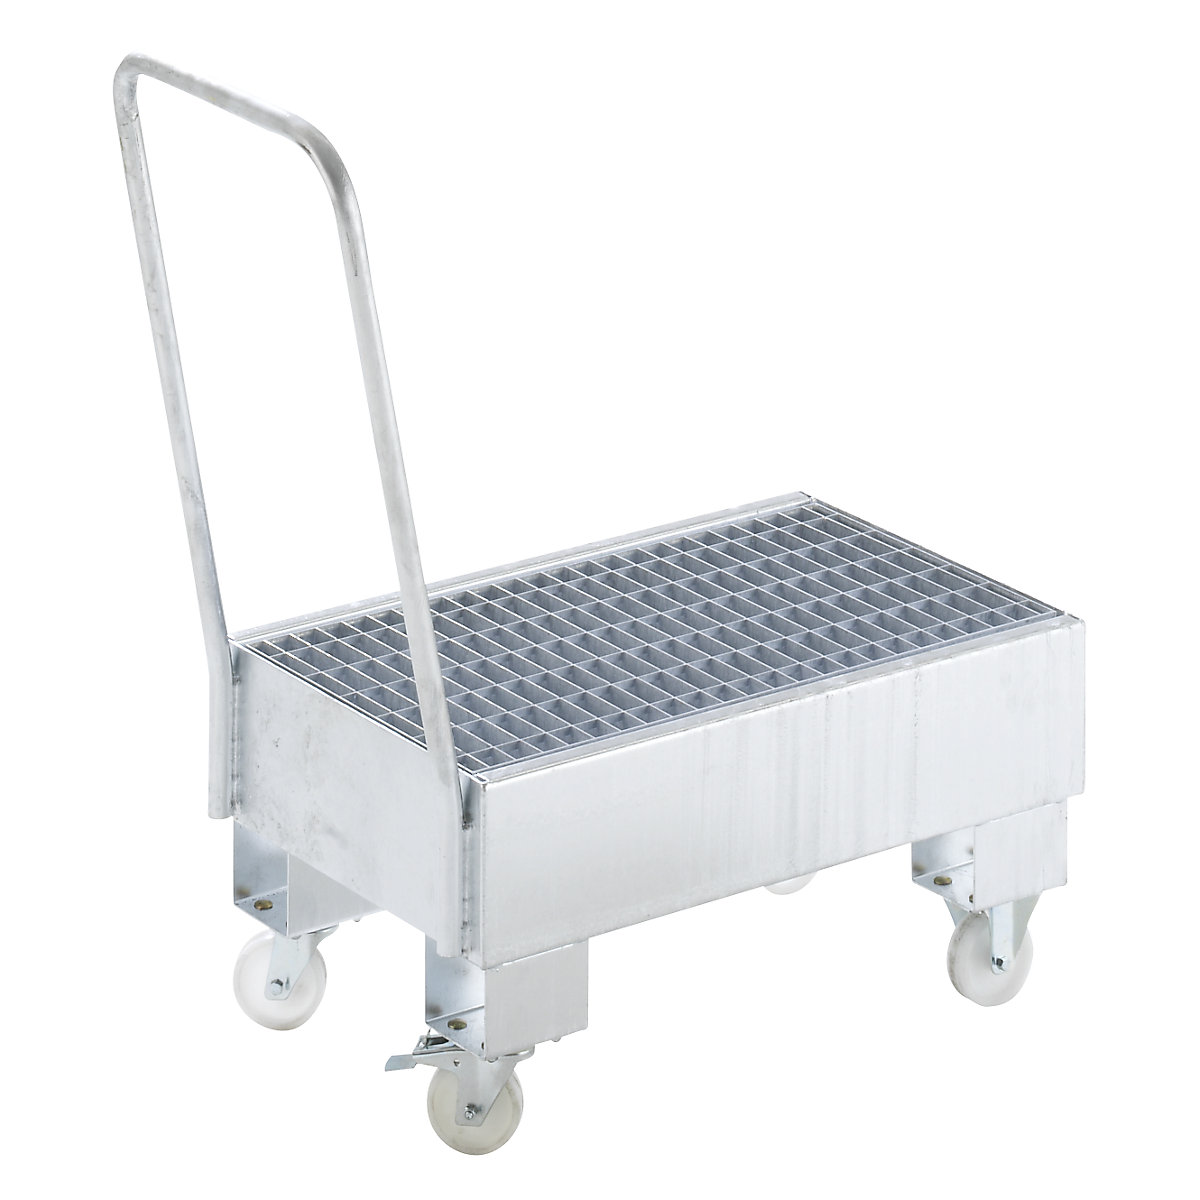 Mobile steel sump tray – eurokraft pro, for 60 l drums, 2 x upright, hot dip galvanised-2